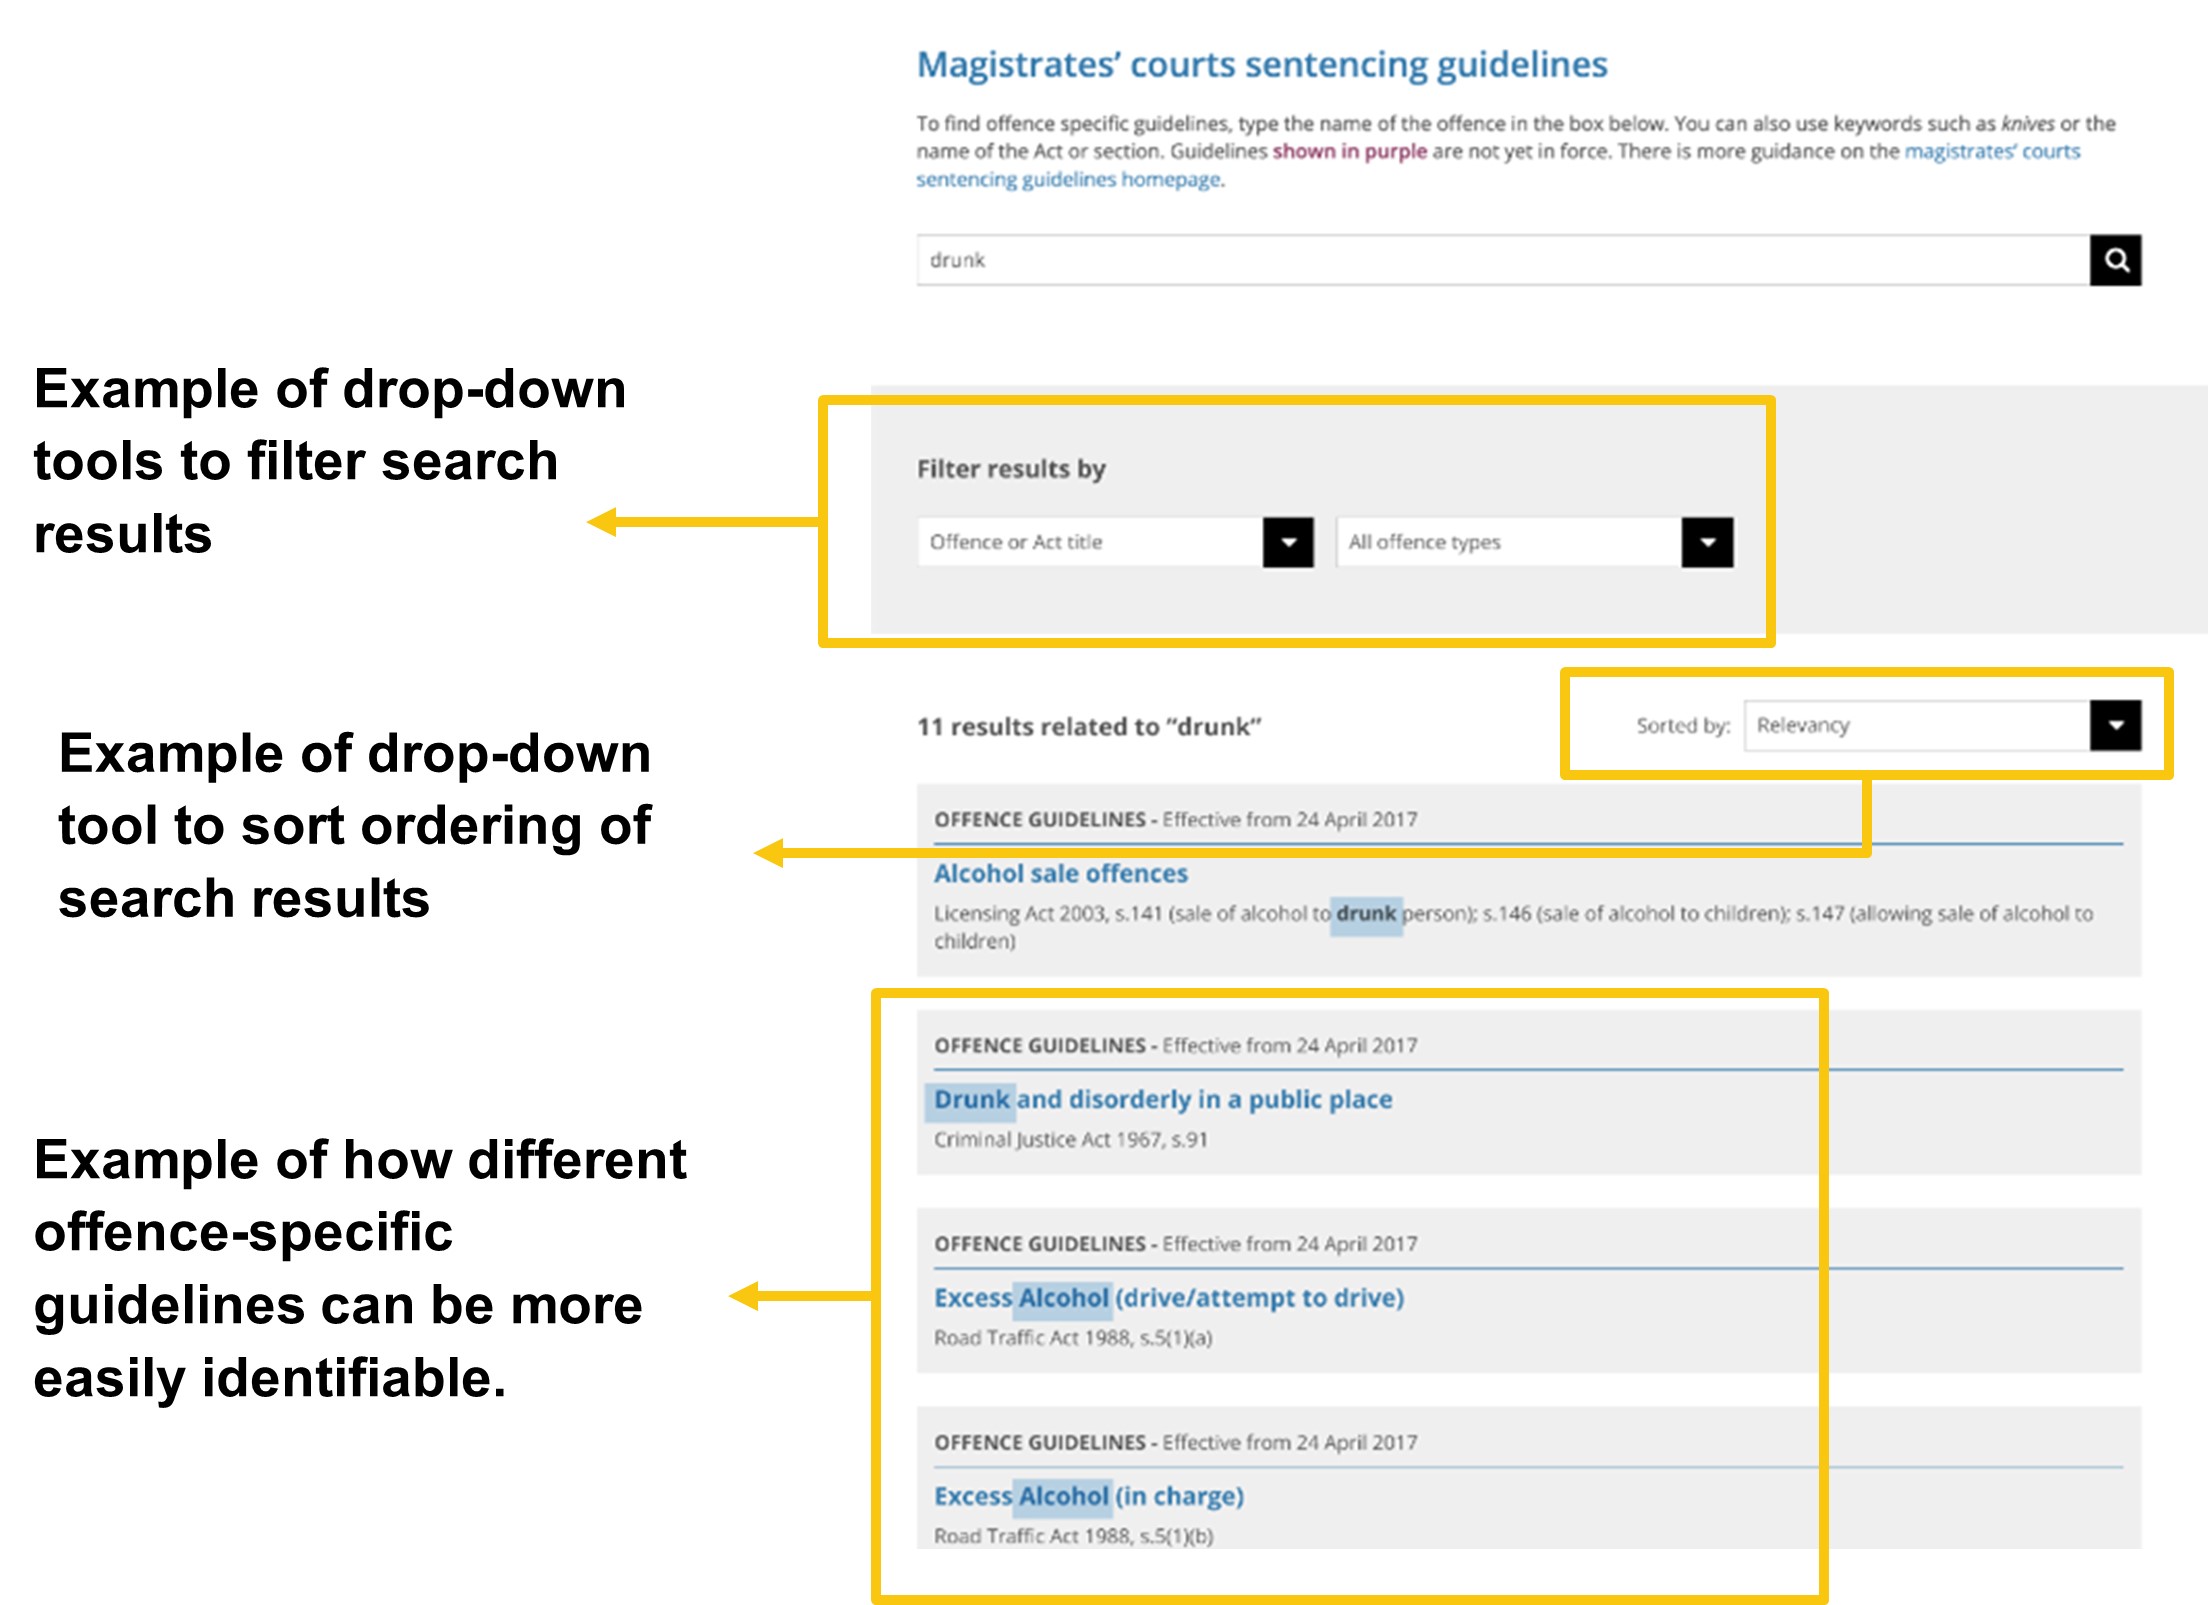 Image showing a mock up of recommendation A2. Drop downs allow users to filter and sort search results. Guidelines are made more easily identifiable with blue highlight